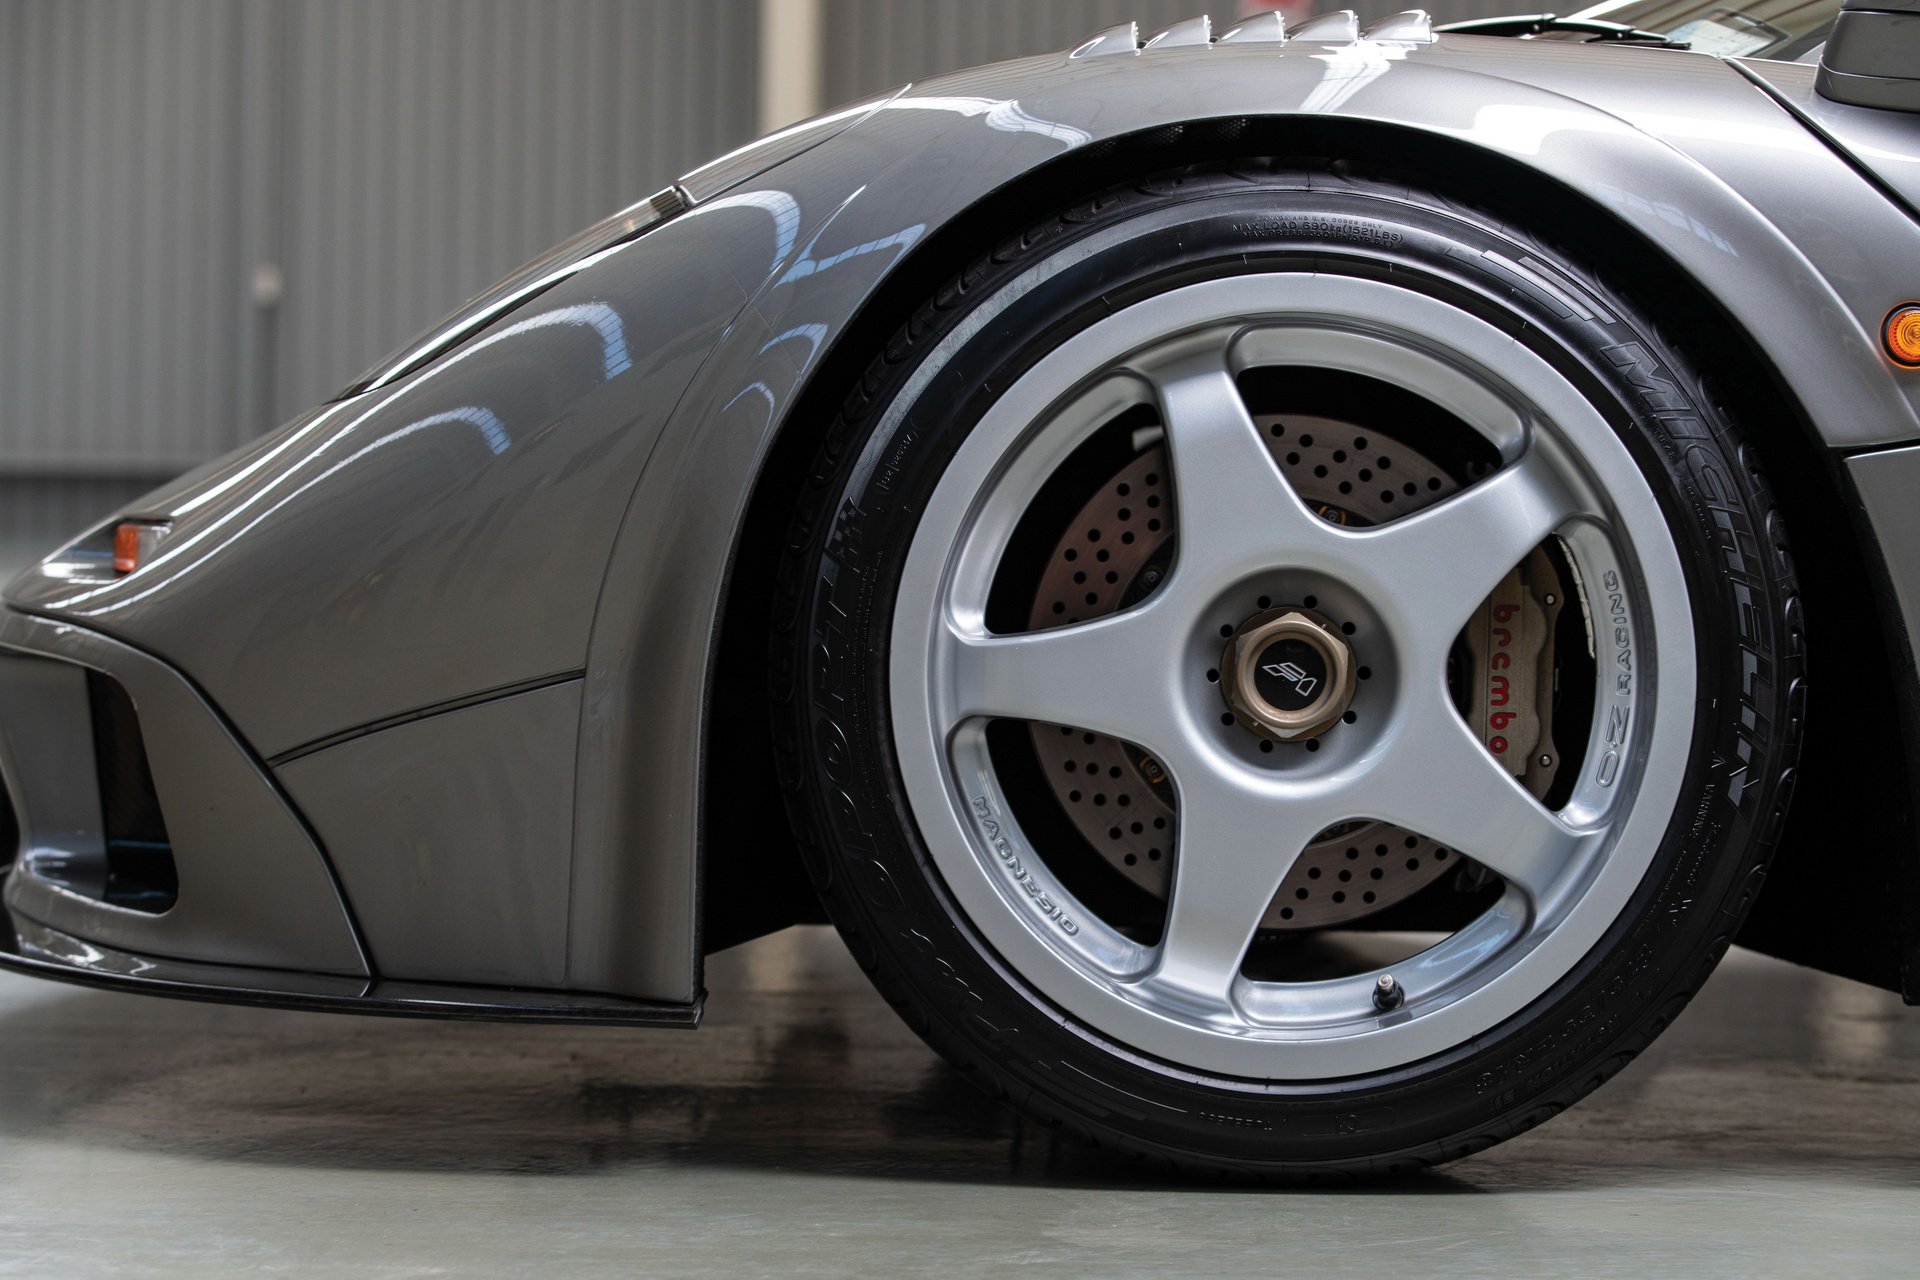 1994 Mclaren F1 Lm Specification Is Automotive Perfection